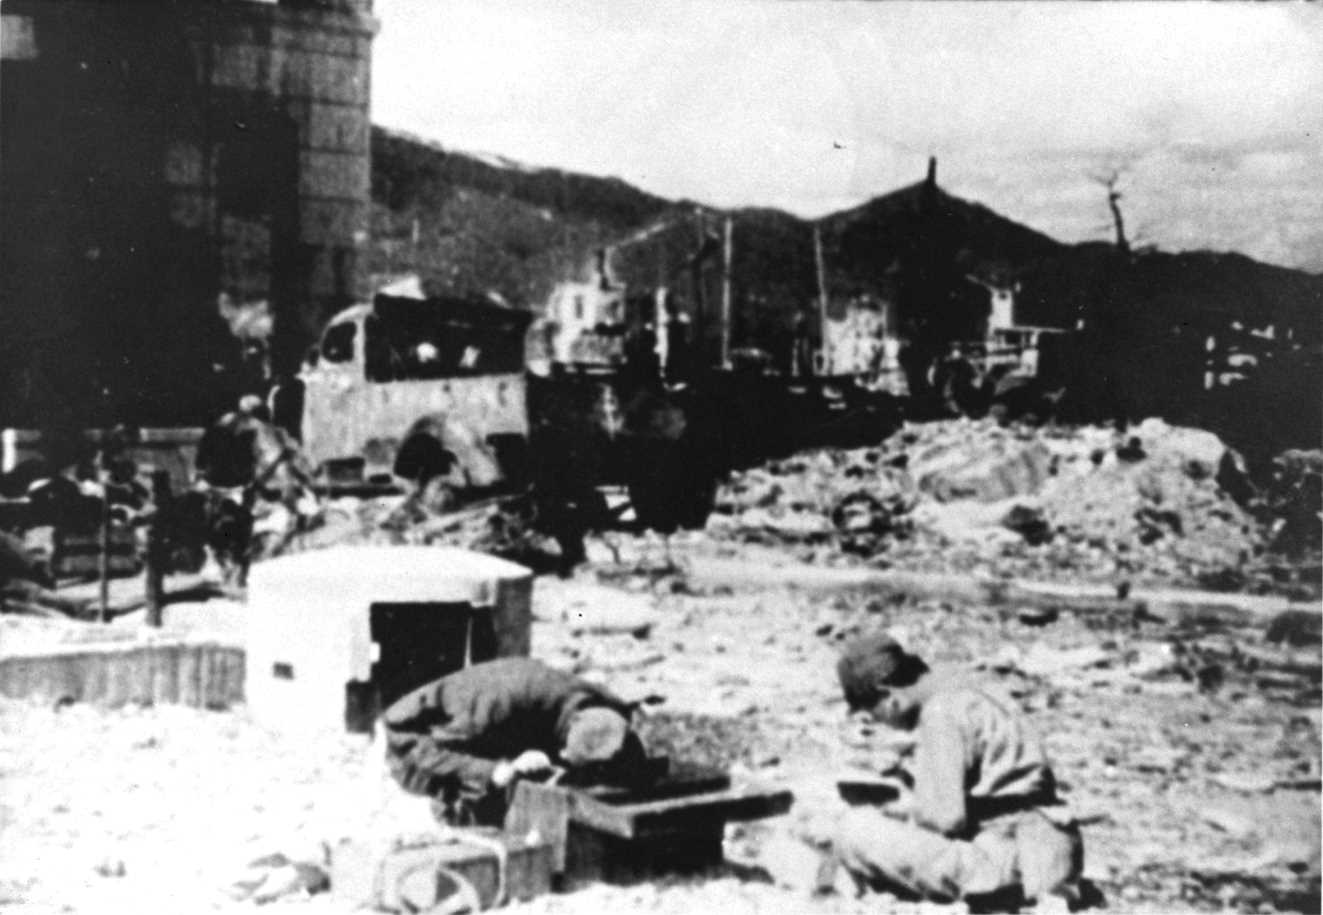 Scientists measure radiation in Hiroshima, taken sometime between late Septemeber and October, 1945 (Kyodo)